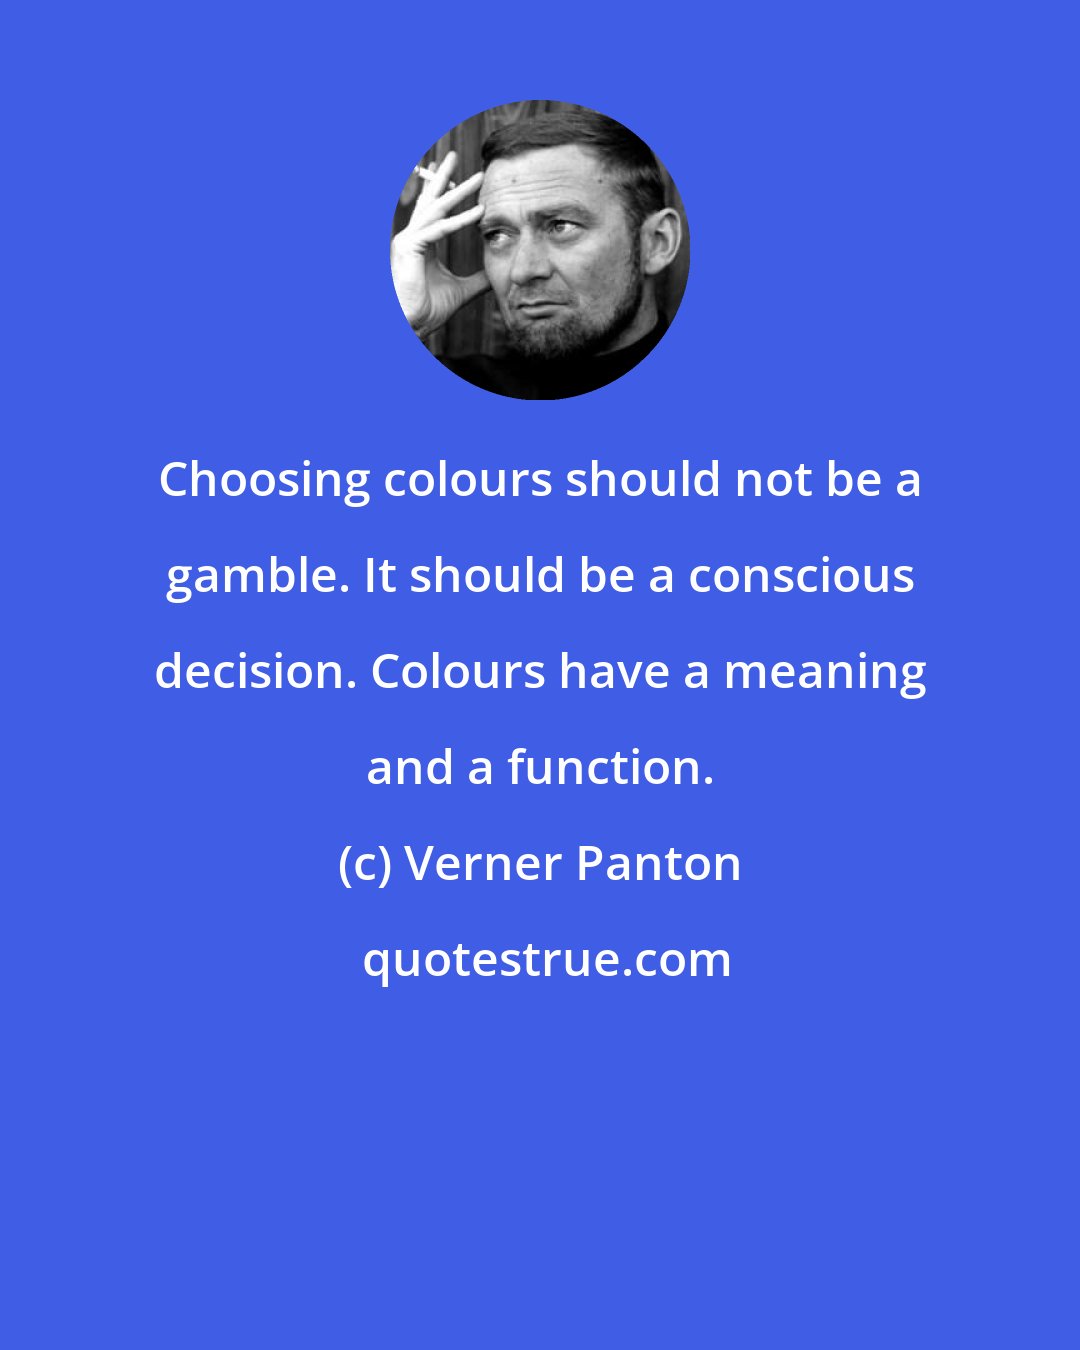 Verner Panton: Choosing colours should not be a gamble. It should be a conscious decision. Colours have a meaning and a function.